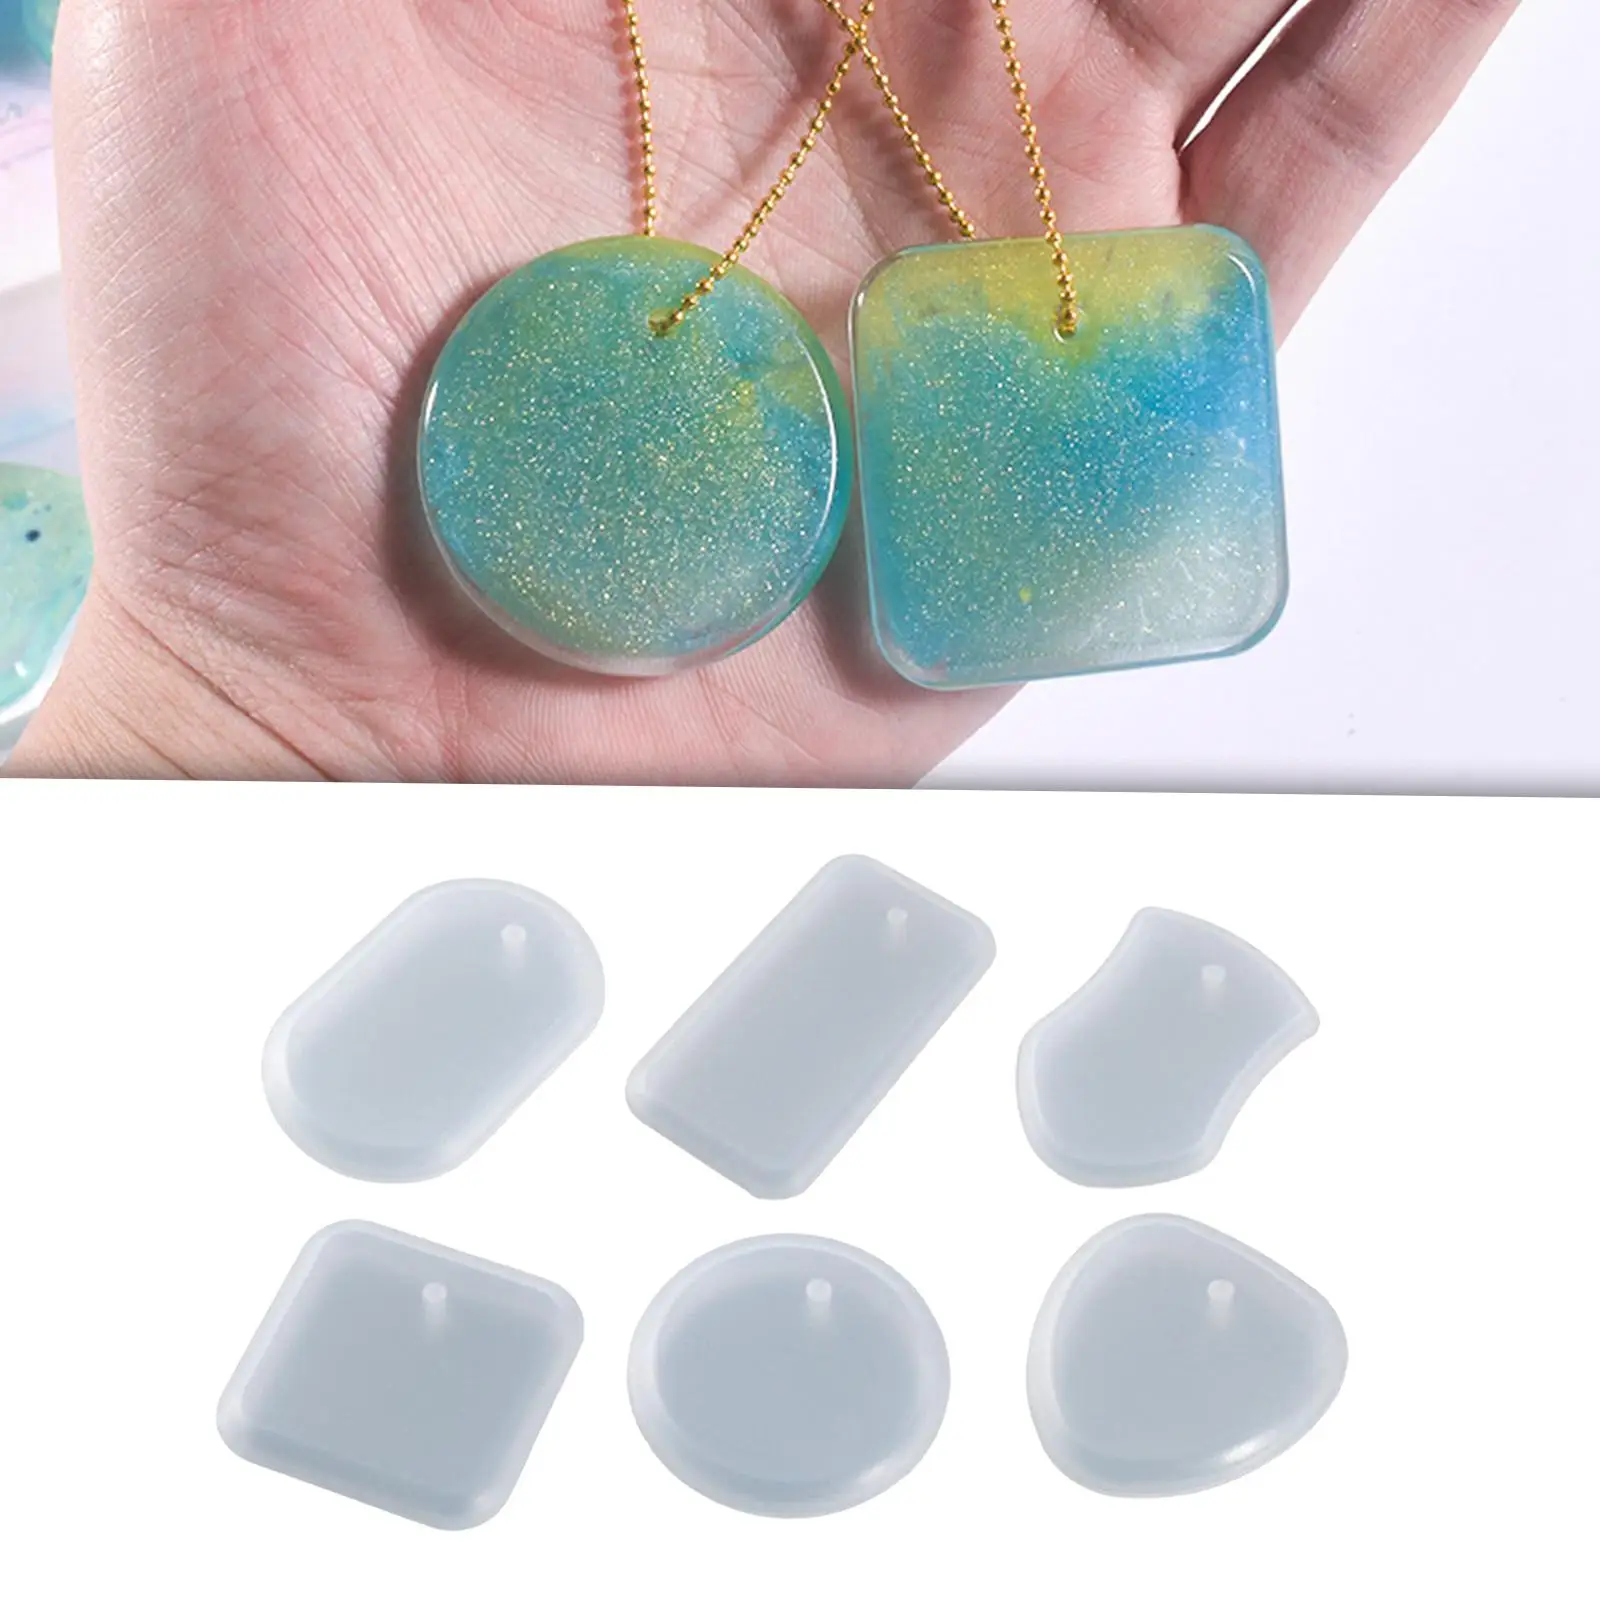 6 Pieces Silicone Resin Pendant Jewellery  with Hanging Hole for DIY Jewelry Craft Making - 6 Shapes